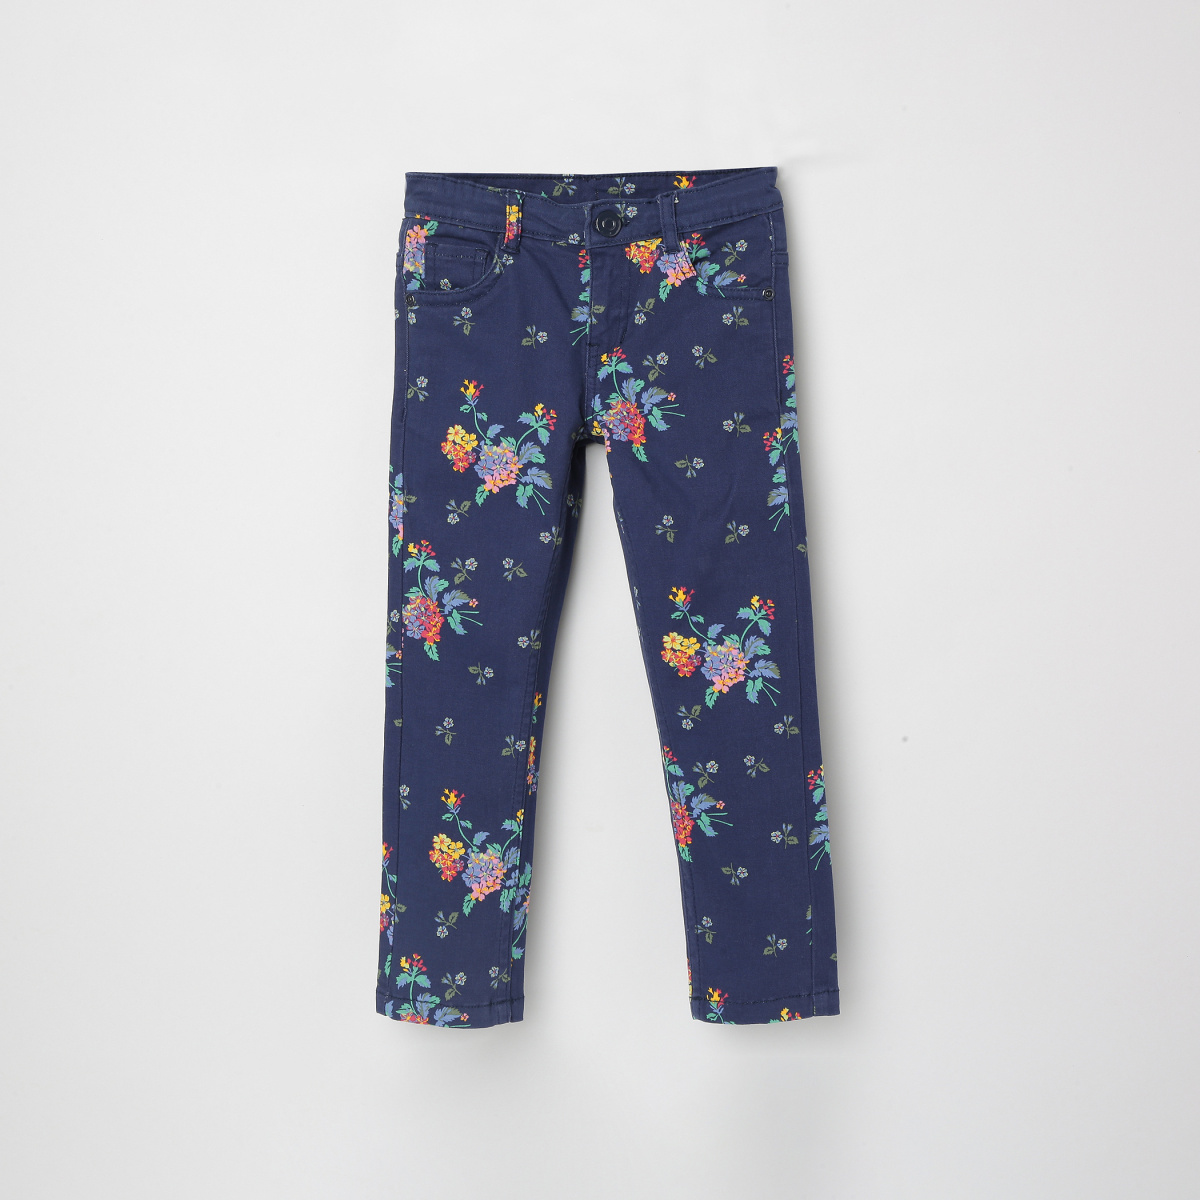 Buy Arrow Patterned Weave Twill Trousers - NNNOW.com